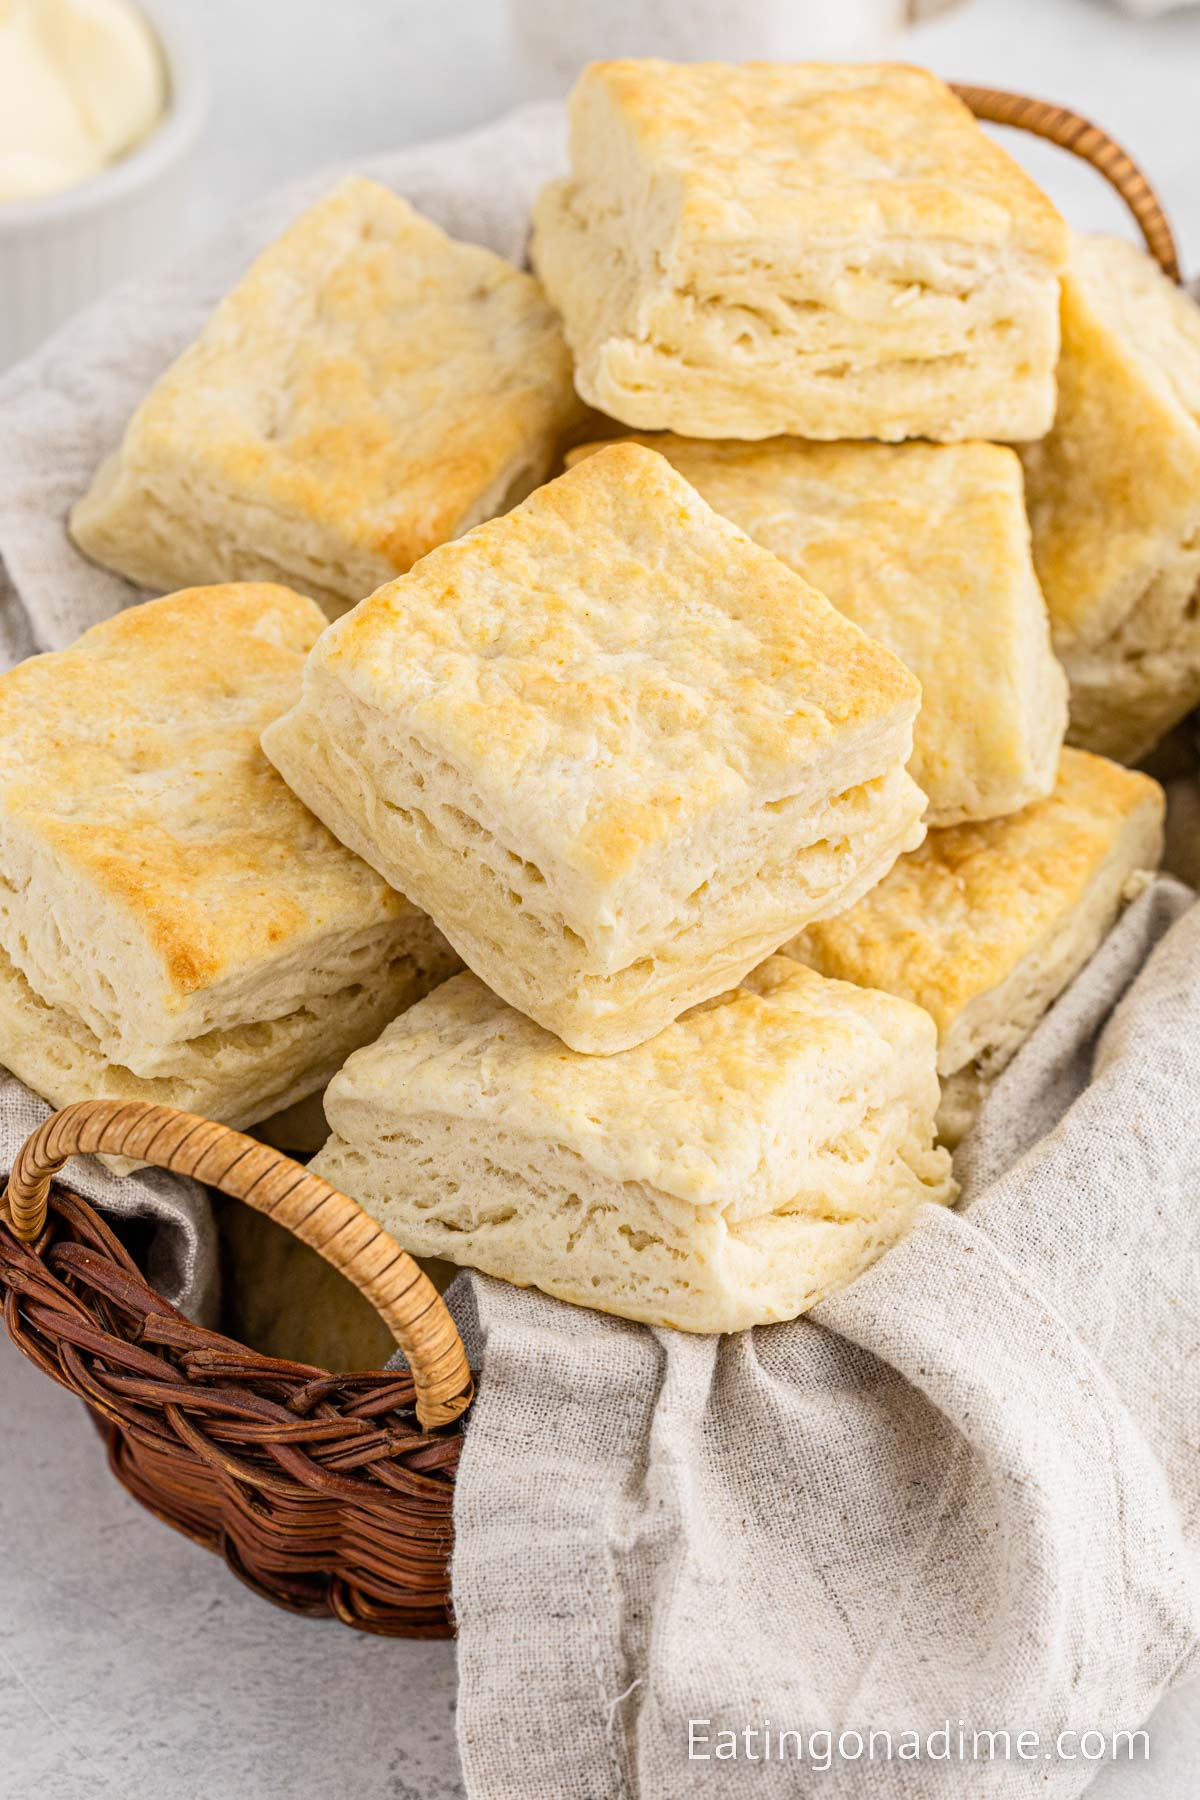 Homemade biscuits in a basket